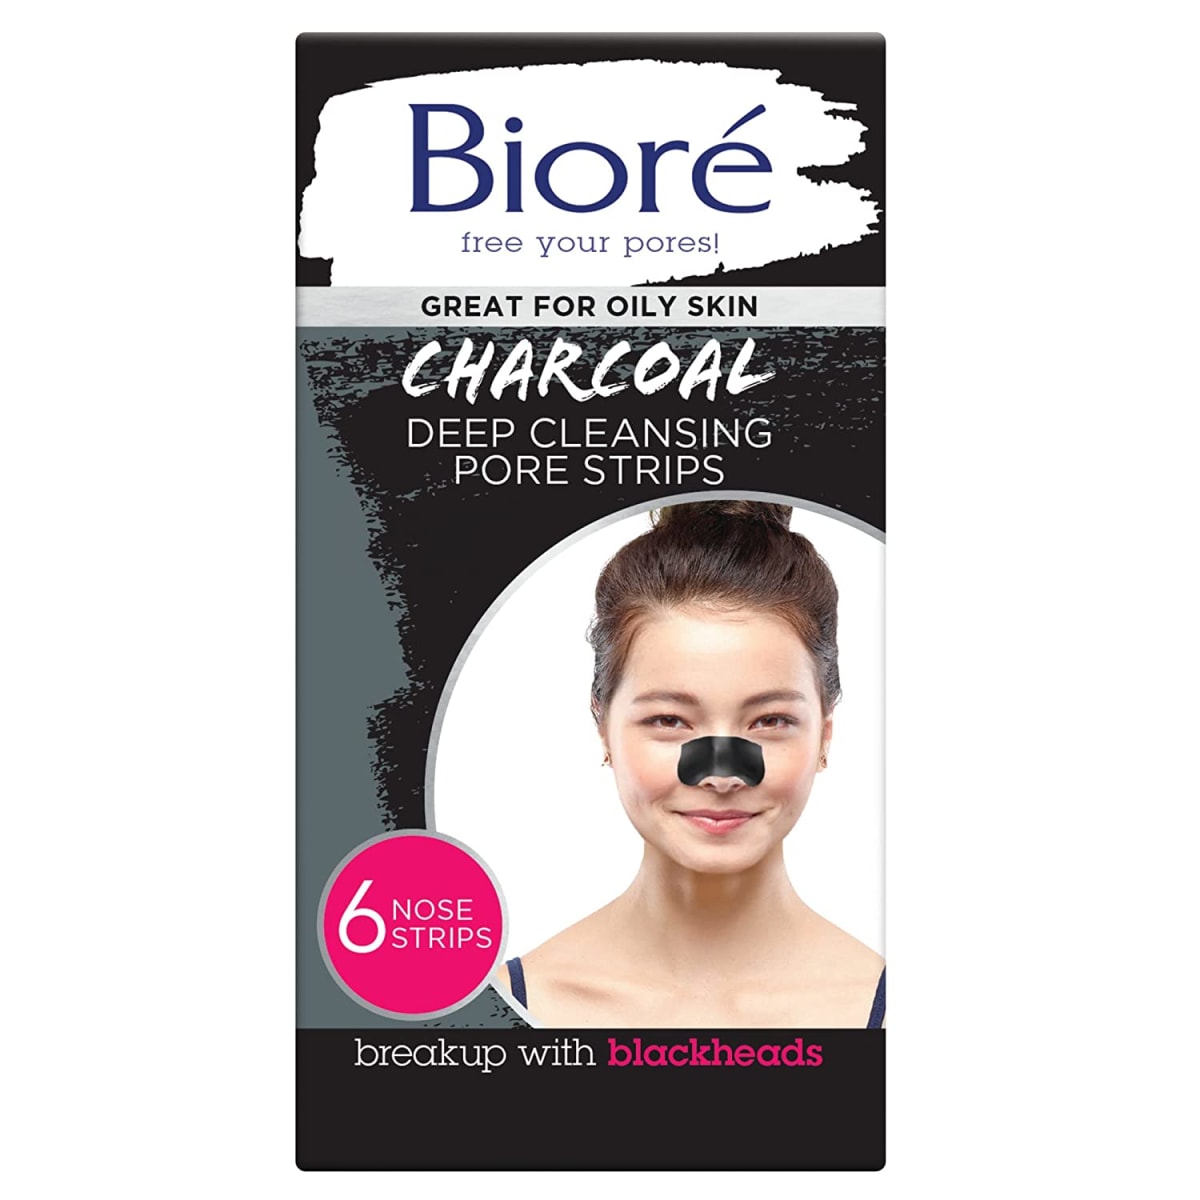 Bioré Charcoal, Deep Cleansing Pore Strips, Nose Strips for Blackhead Removal on Oily Skin, with Instant Blackhead Removal and Pore Unclogging, 6 Count, Features Natural Charcoal, 3x Less Oil